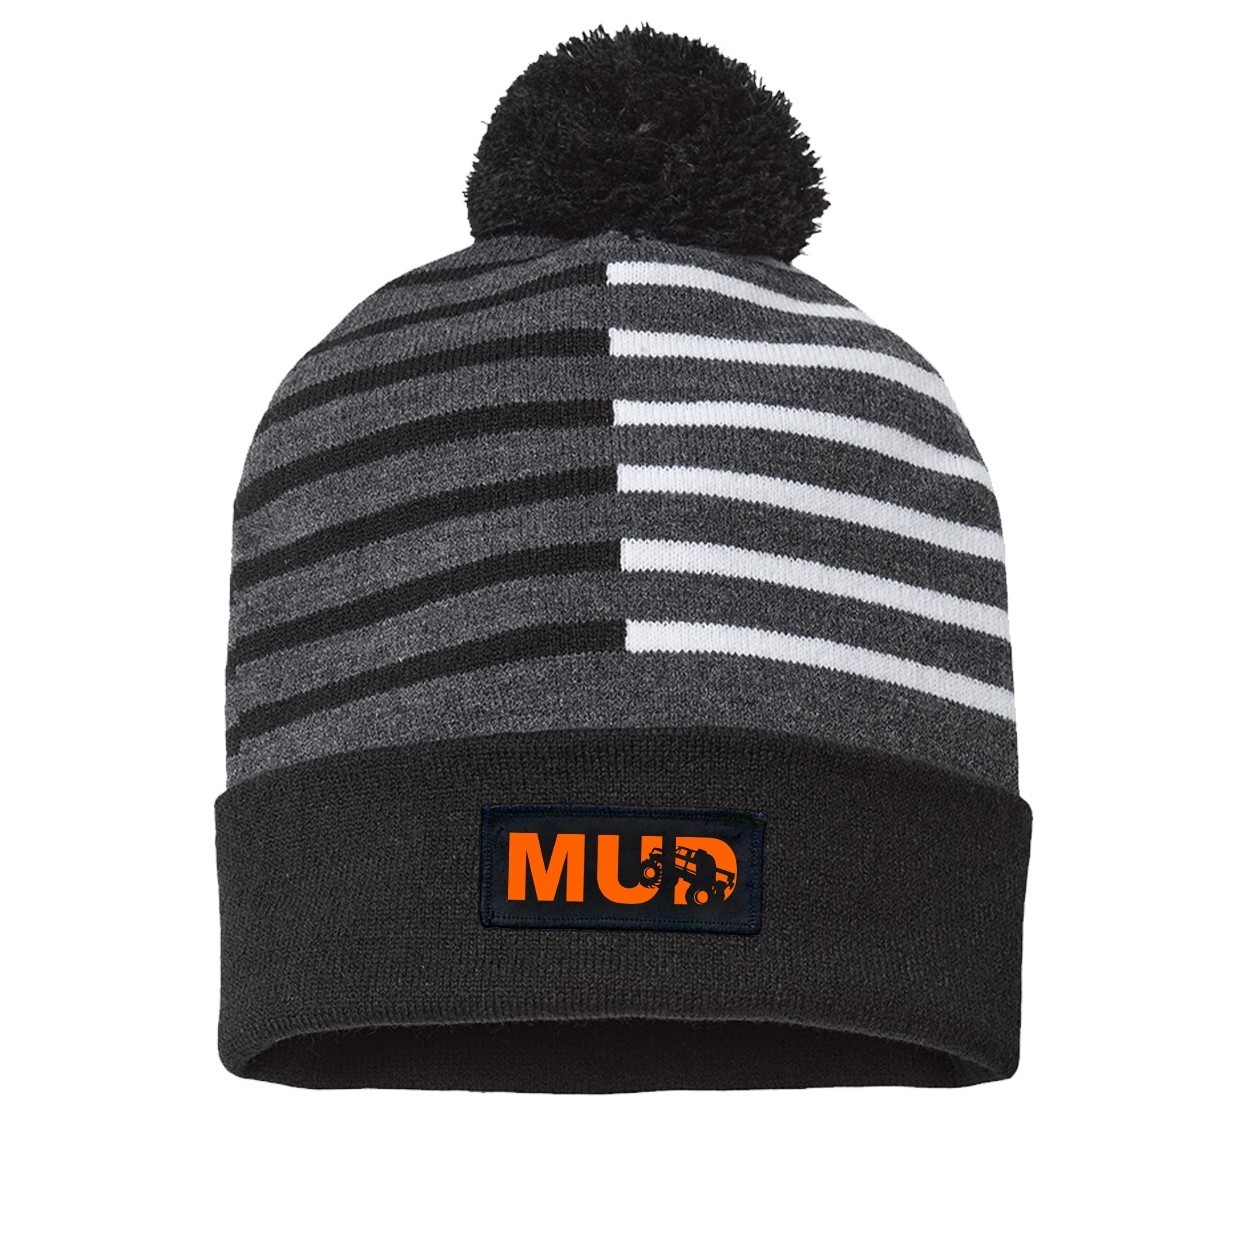 Mud Truck Logo Night Out Woven Patch Roll Up Pom Knit Beanie Half Color Black/White (Orange Logo)